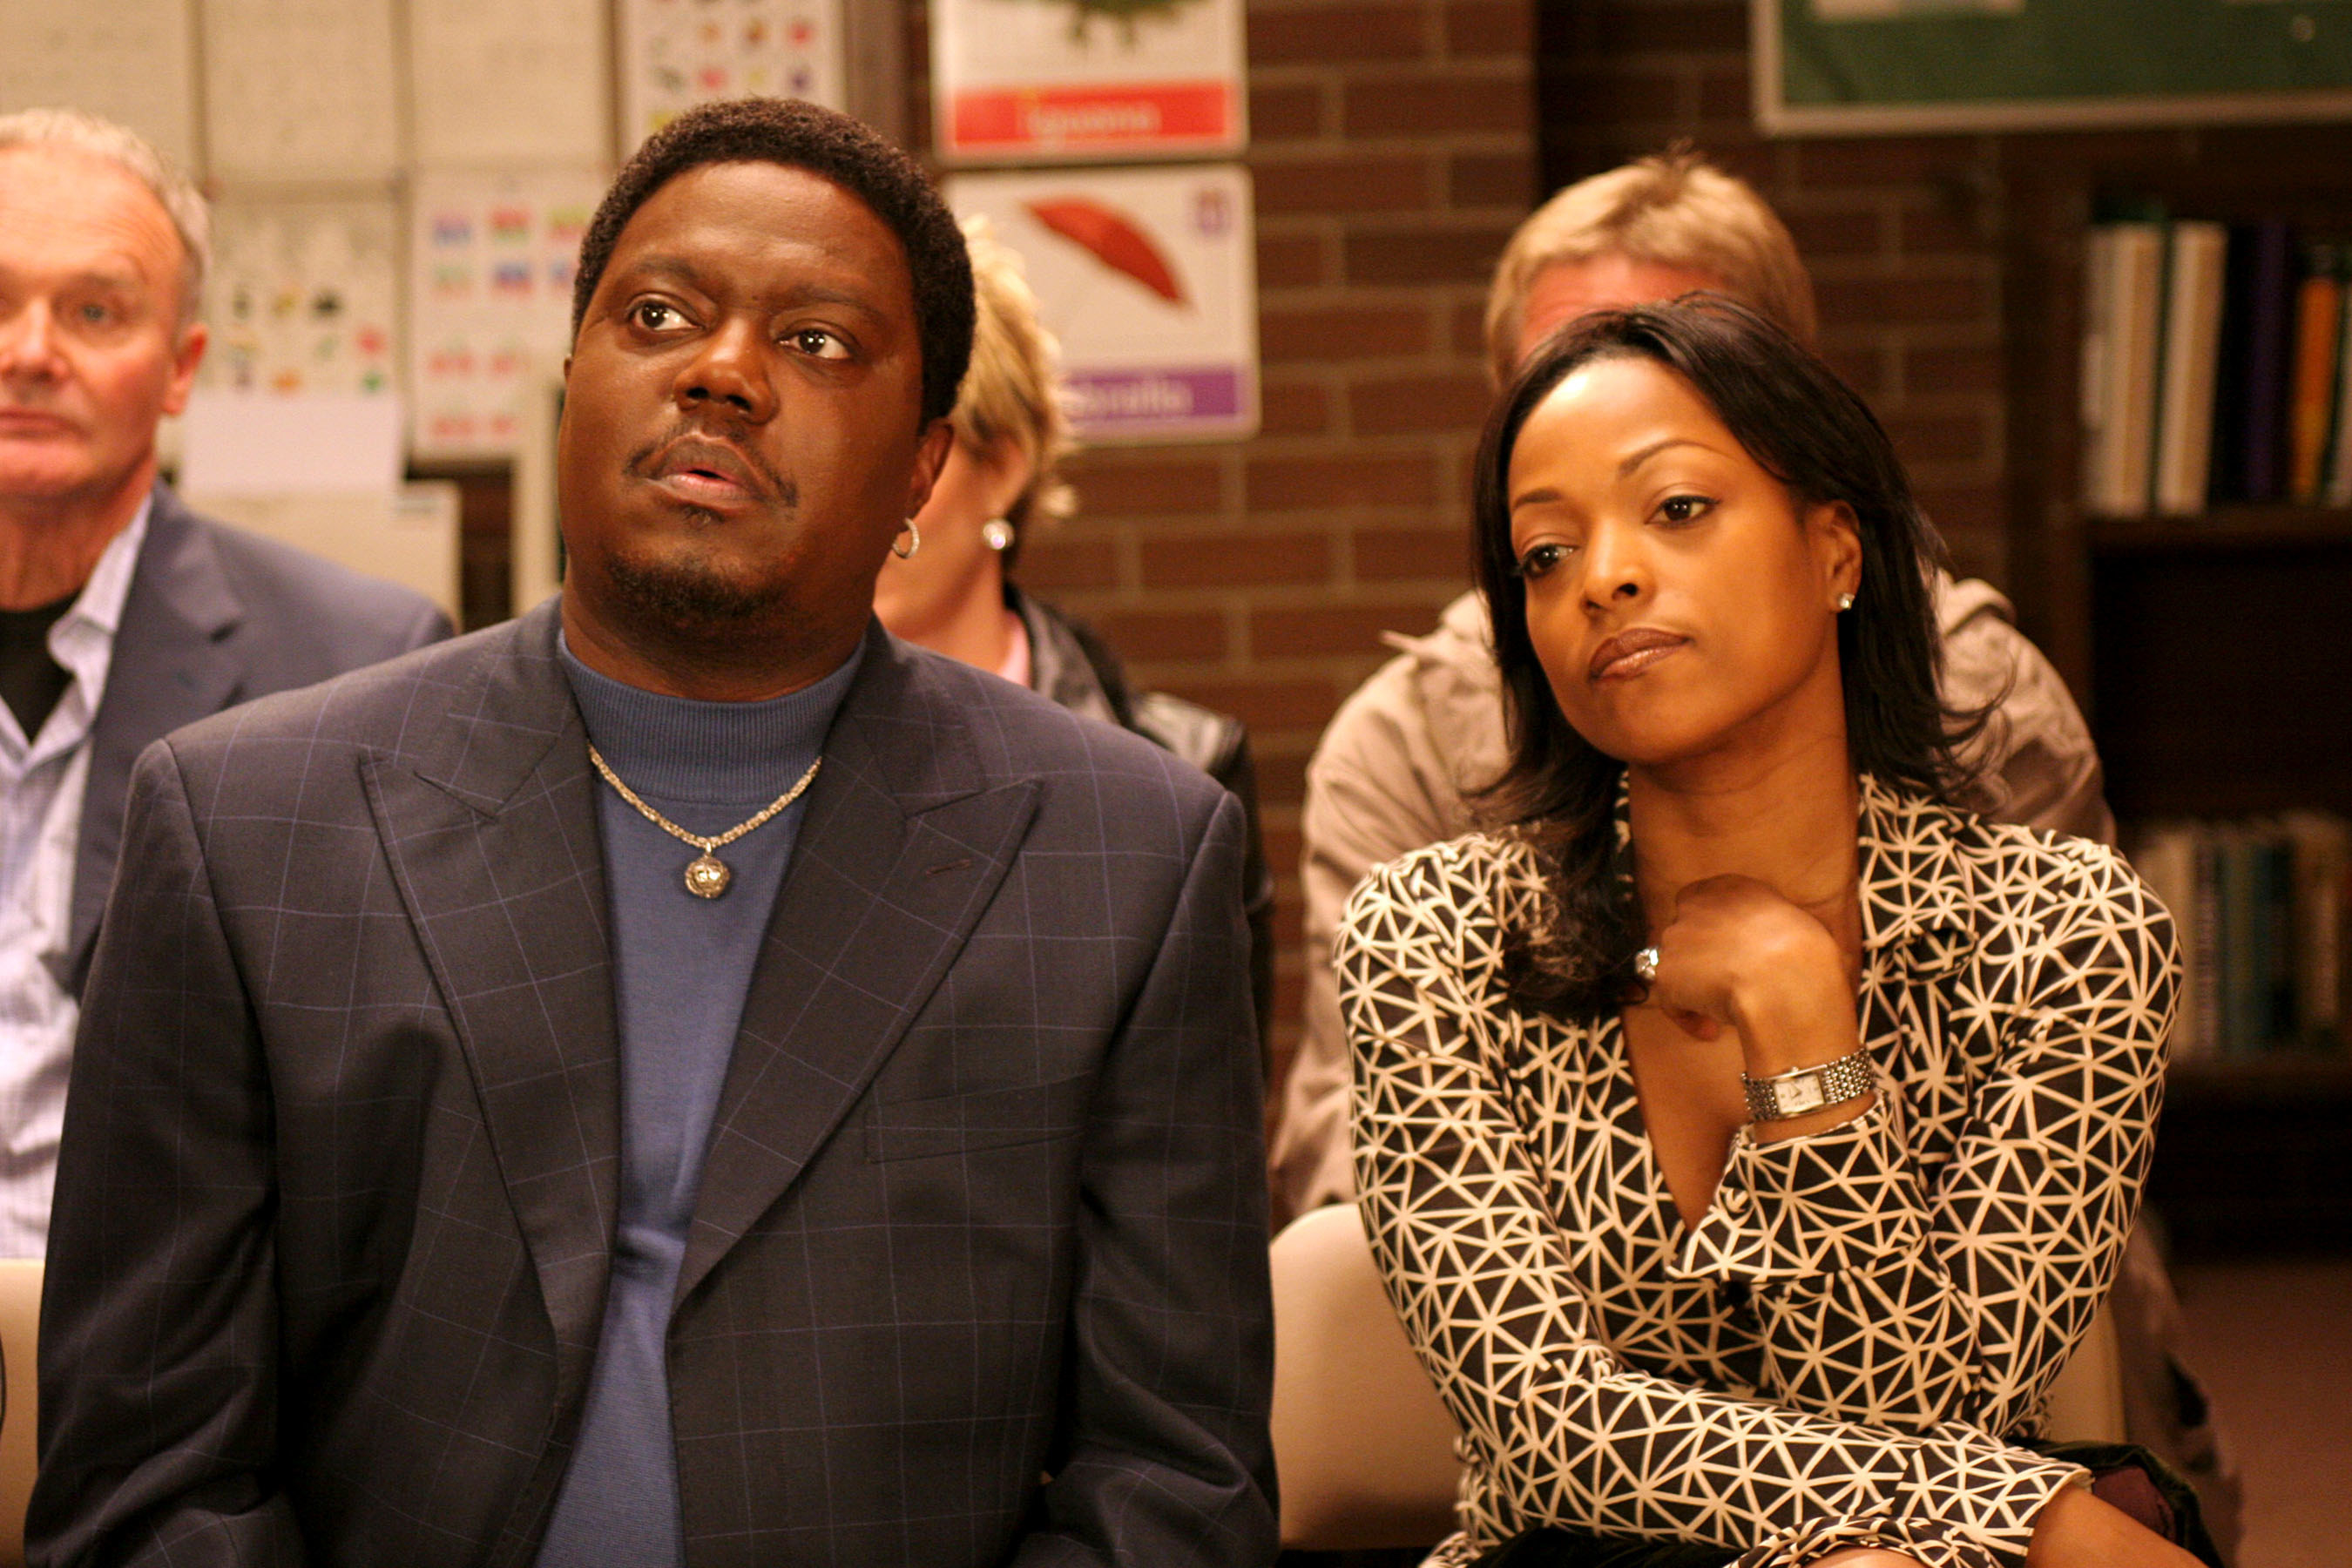 Bernie Mac and his wife attend an event.